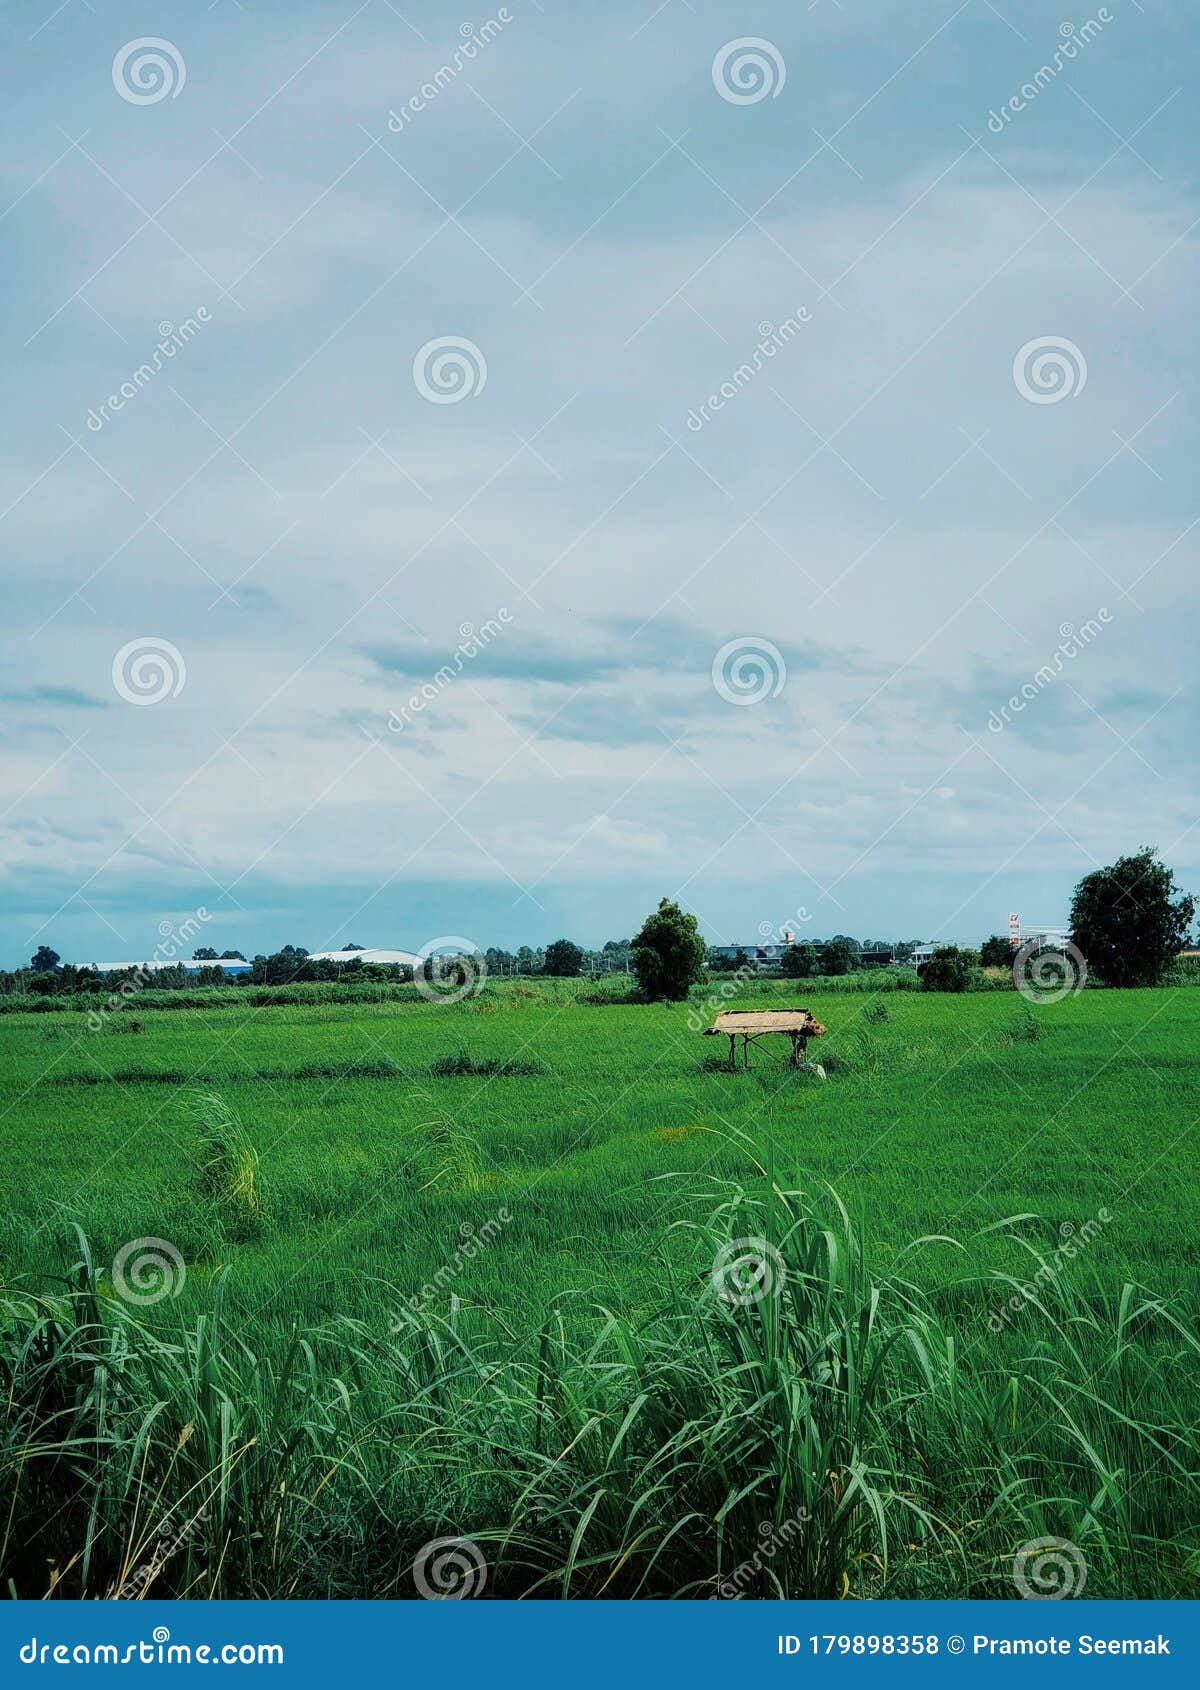 rice field, contryside of thailand